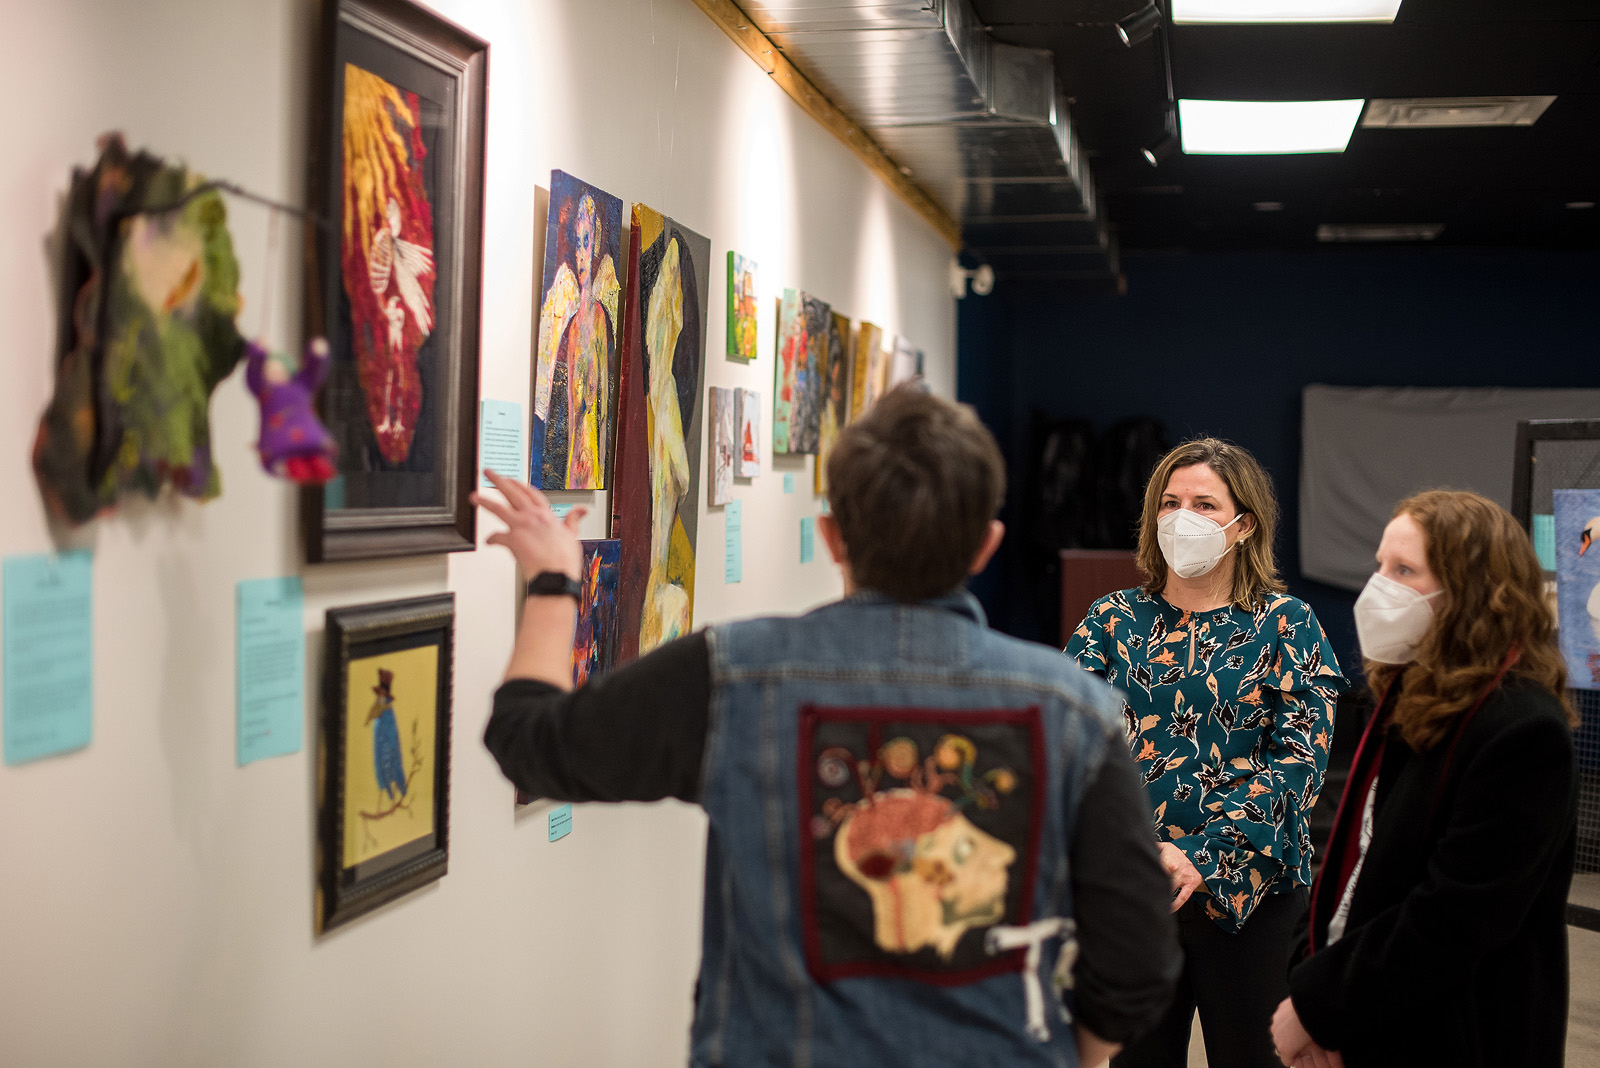 Three people wearing masks are facing a wall of paintings at an art gallery.